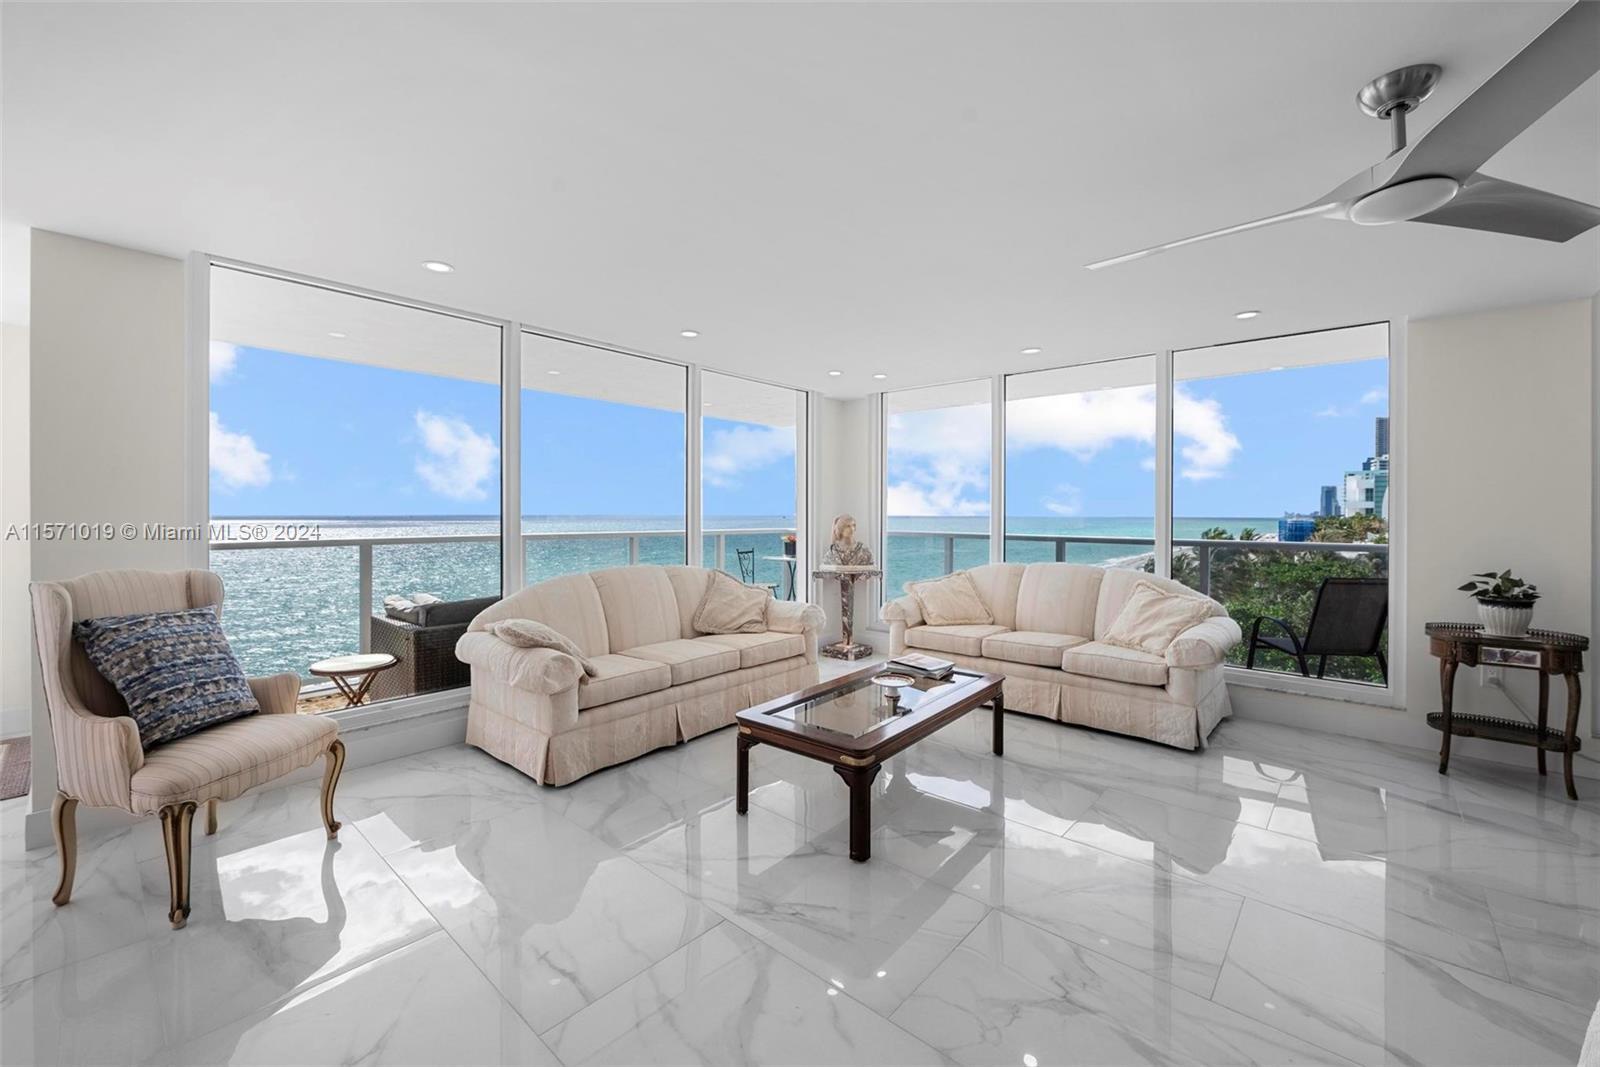 Photo of 2751 S Ocean Dr #605S in Hollywood, FL